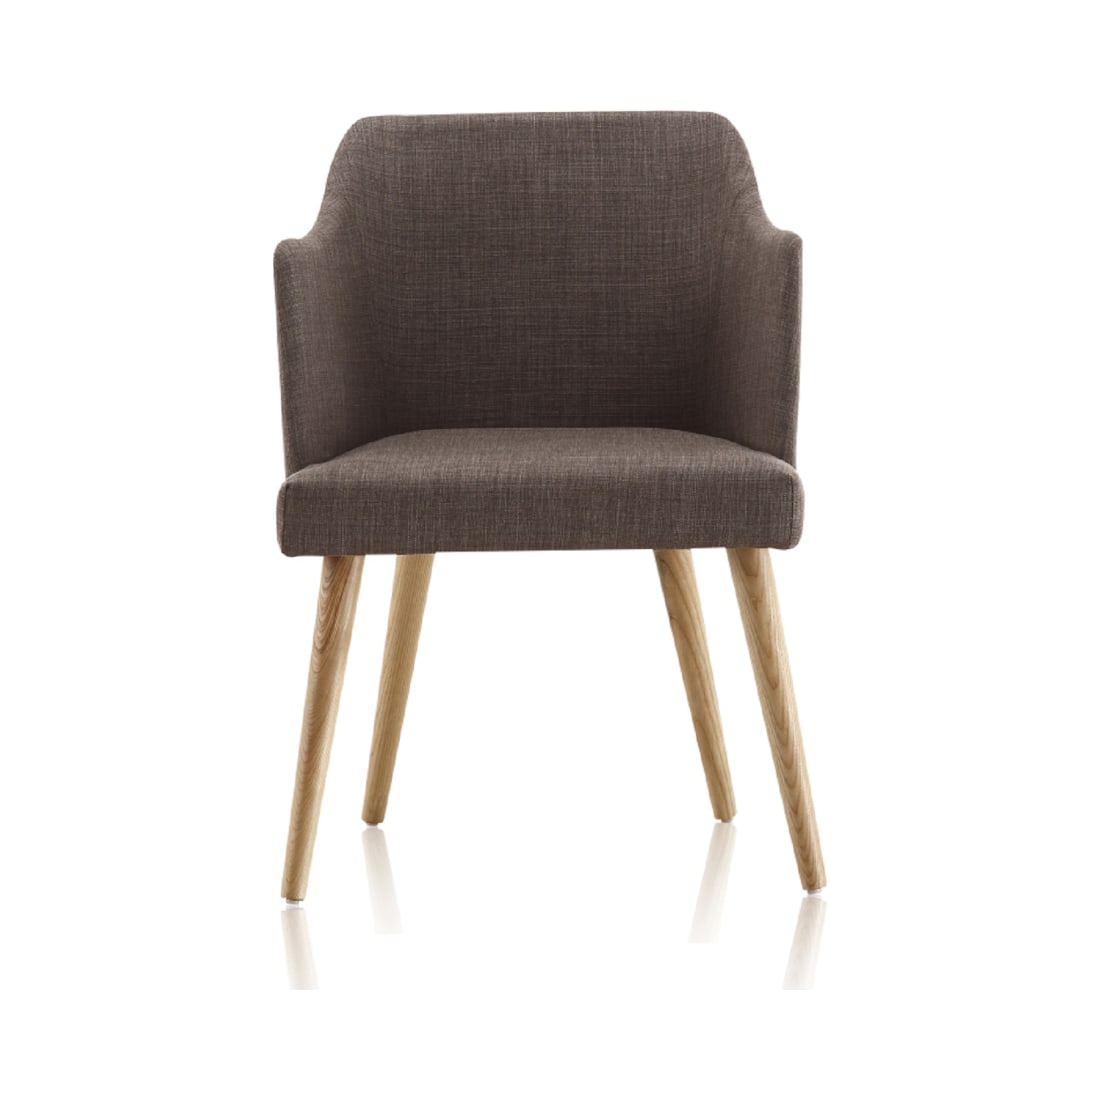 Kee Dining Chair in Pebble